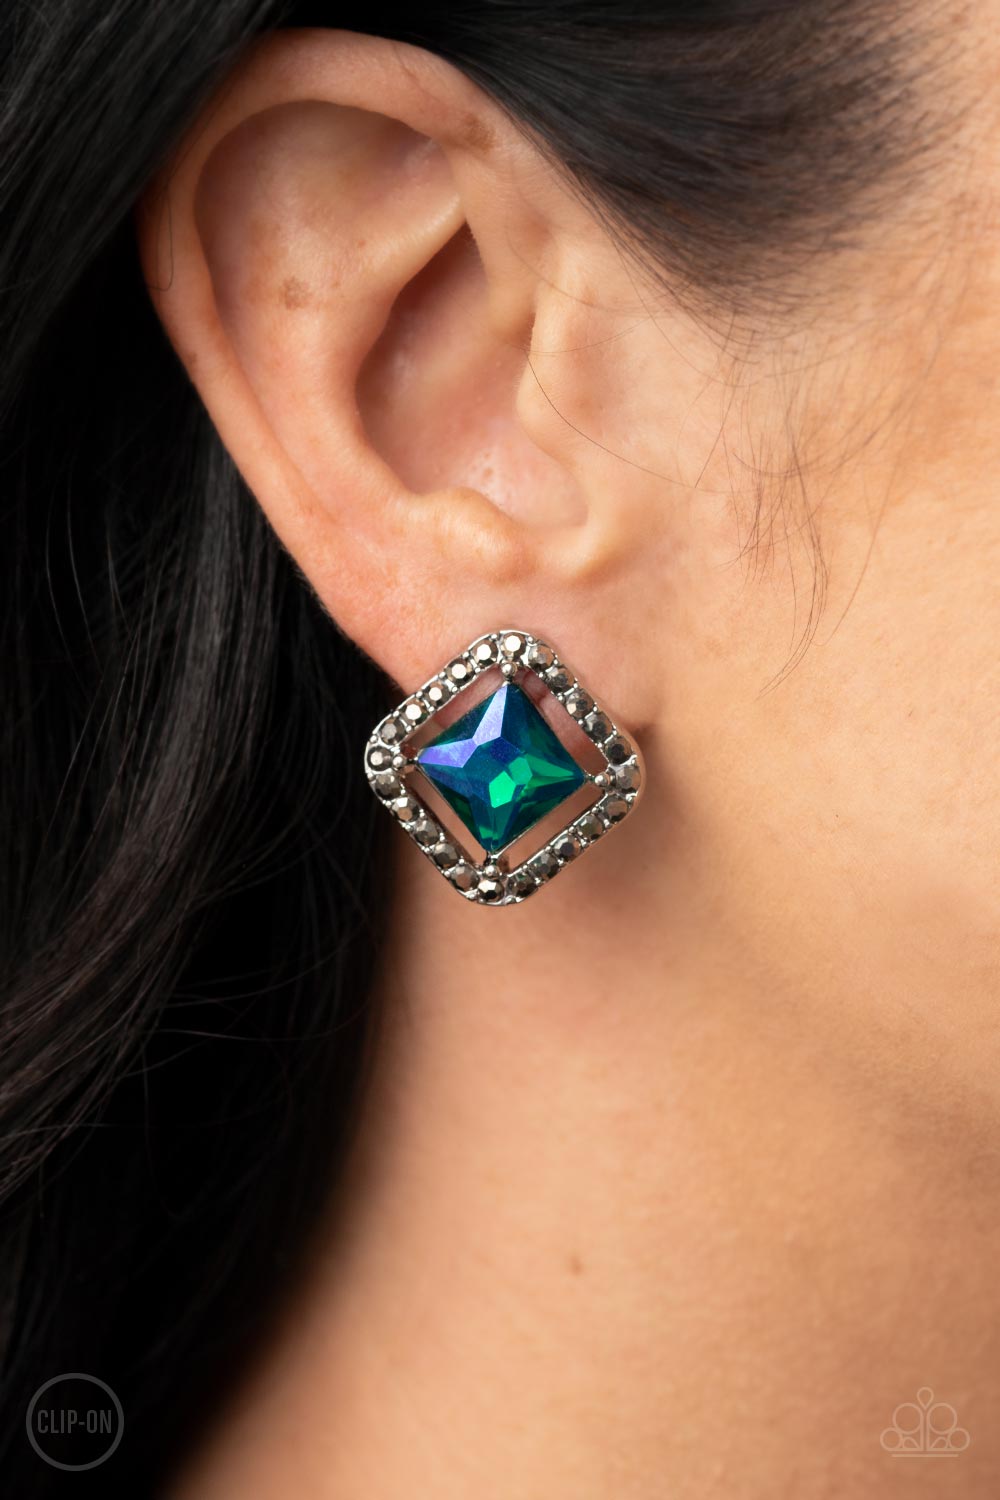 Cosmic Catwalk Green Clip-On Earrings - Paparazzi Accessories-on model - CarasShop.com - $5 Jewelry by Cara Jewels